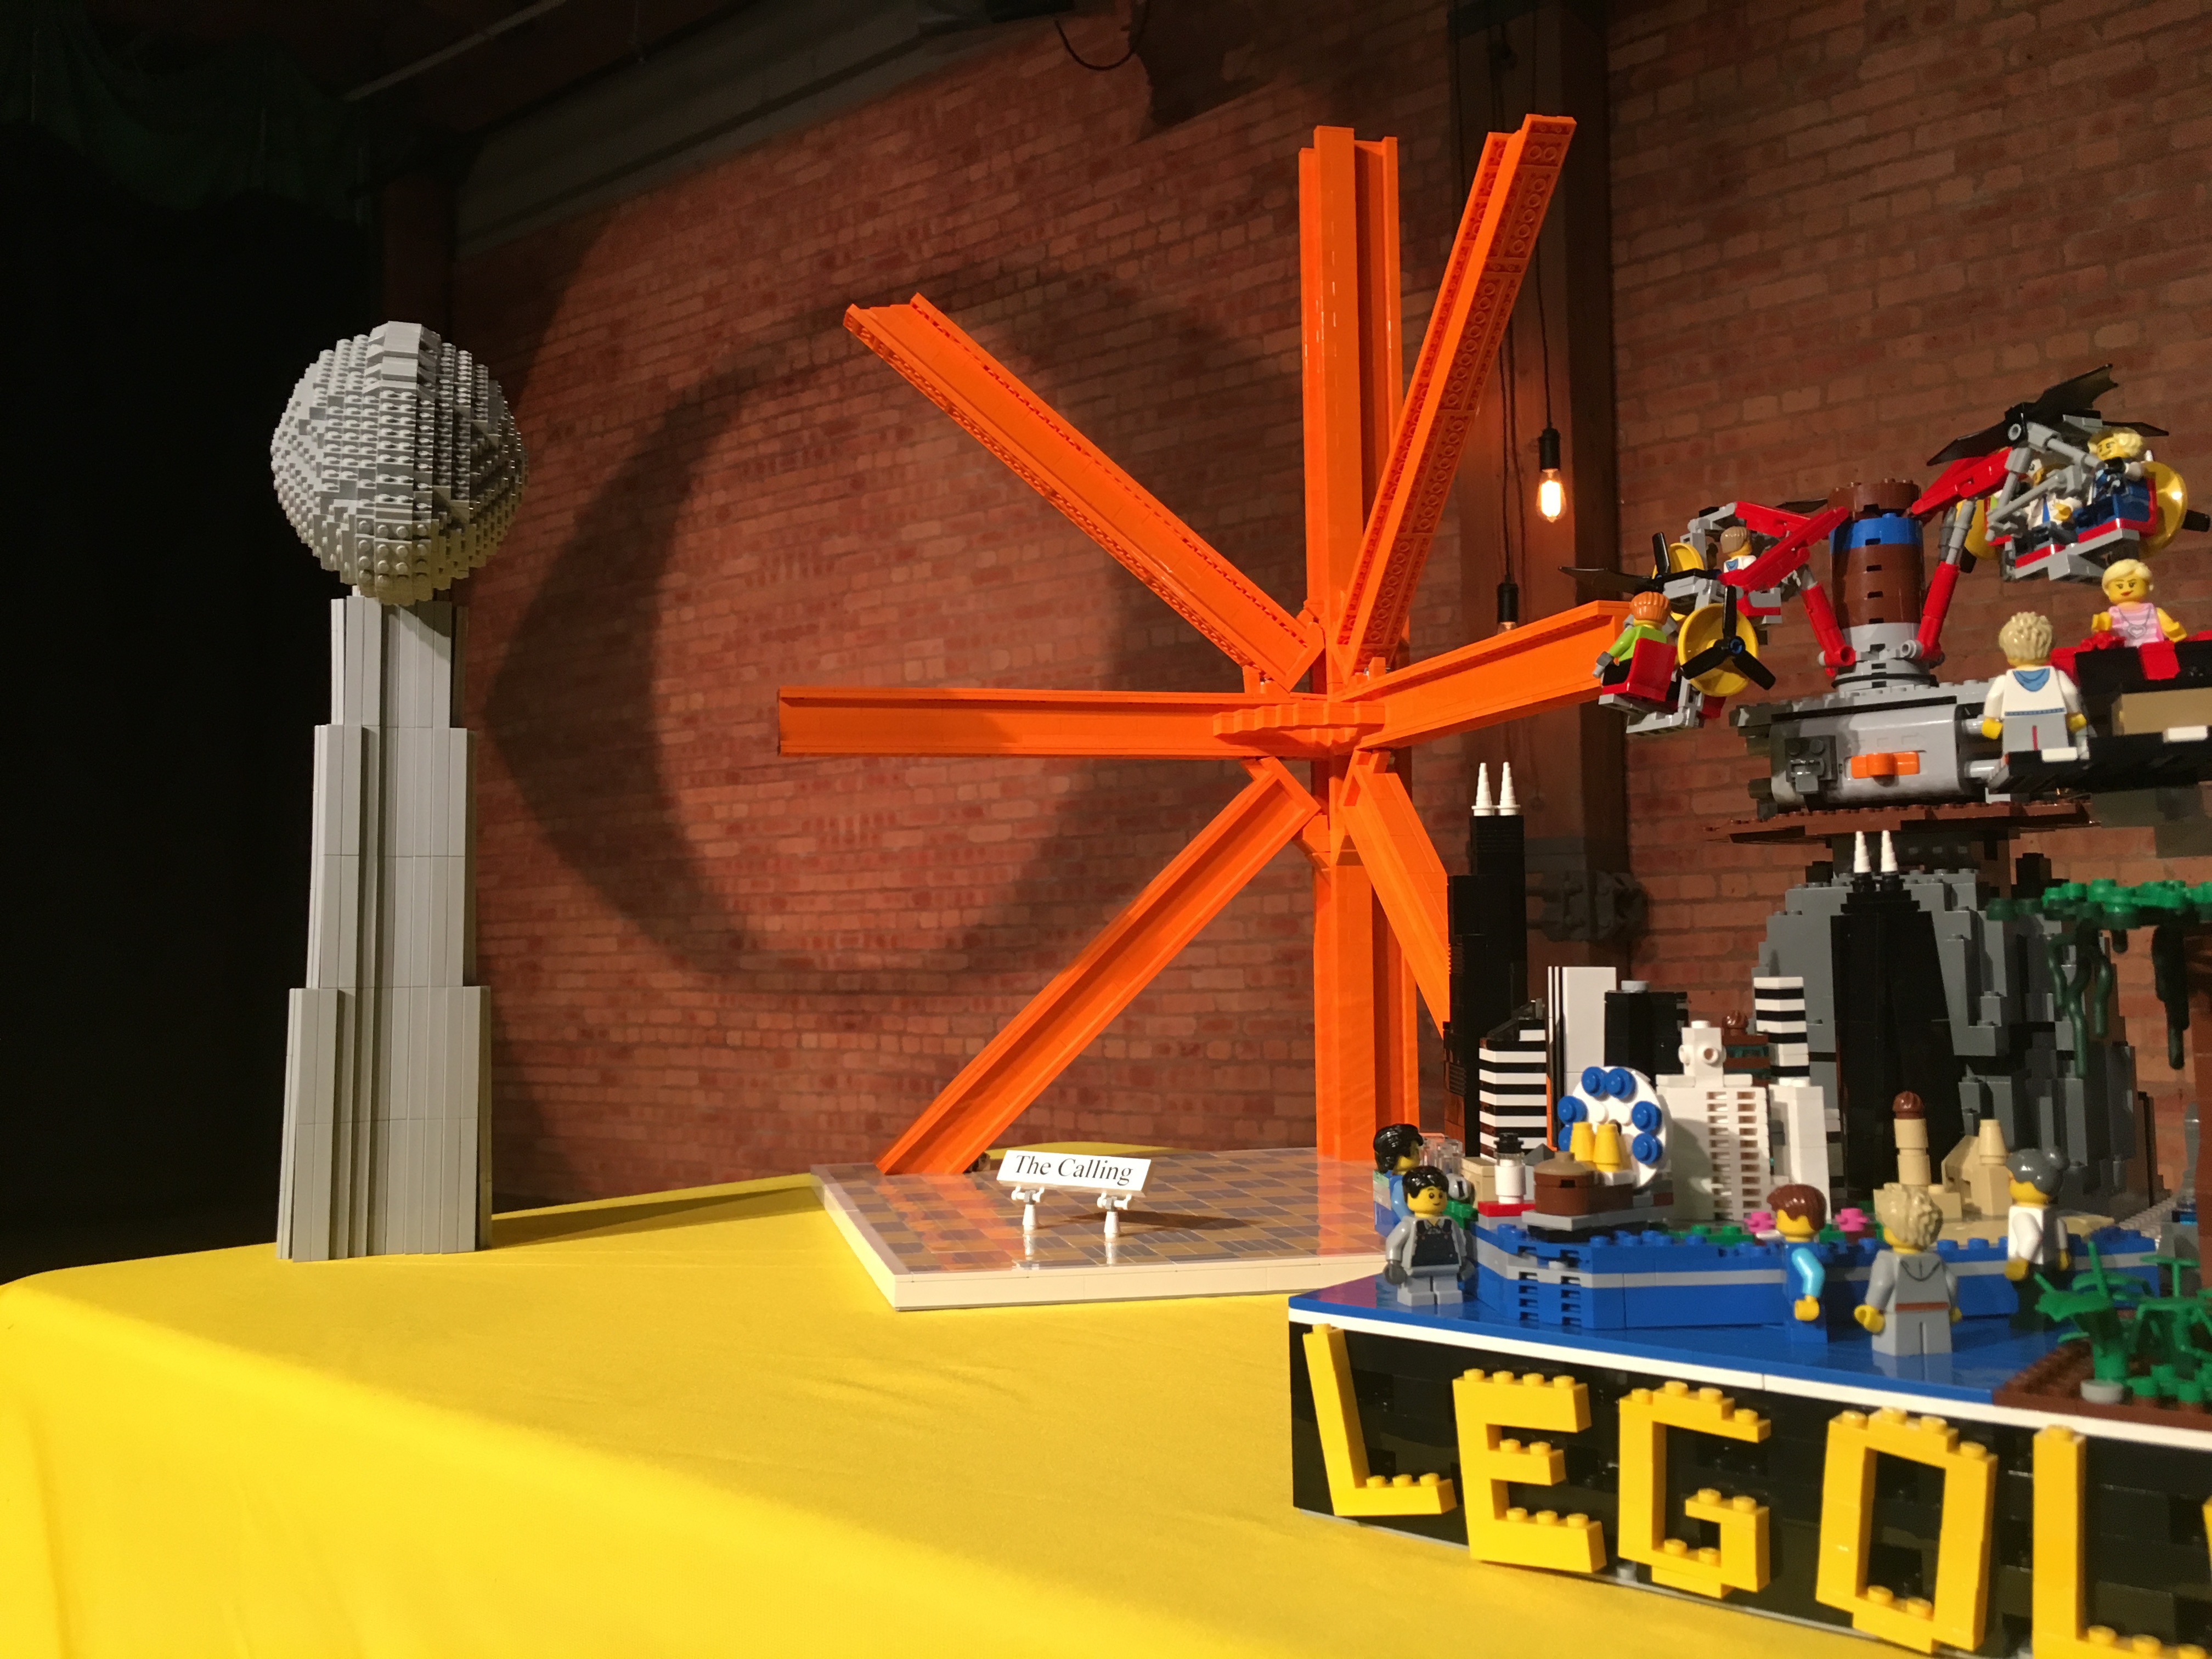 LEGO Master Model Builder Shows Off at CBS 584032 x 3024